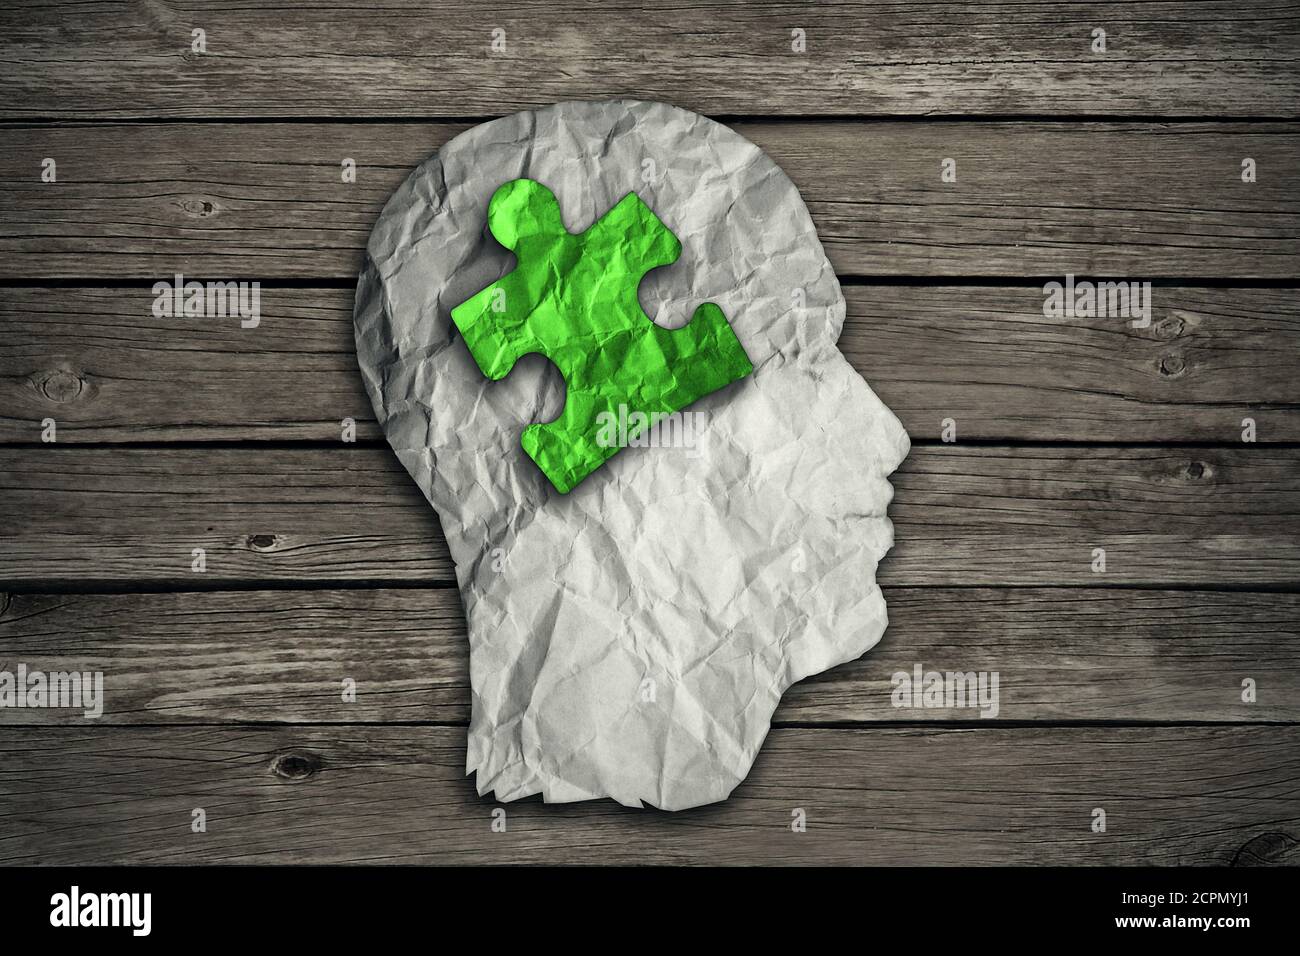 Puzzle head solution concept as a human face profile made from crumpled white paper with a jigsaw piece cut out inside the brain area on old wood back Stock Photo